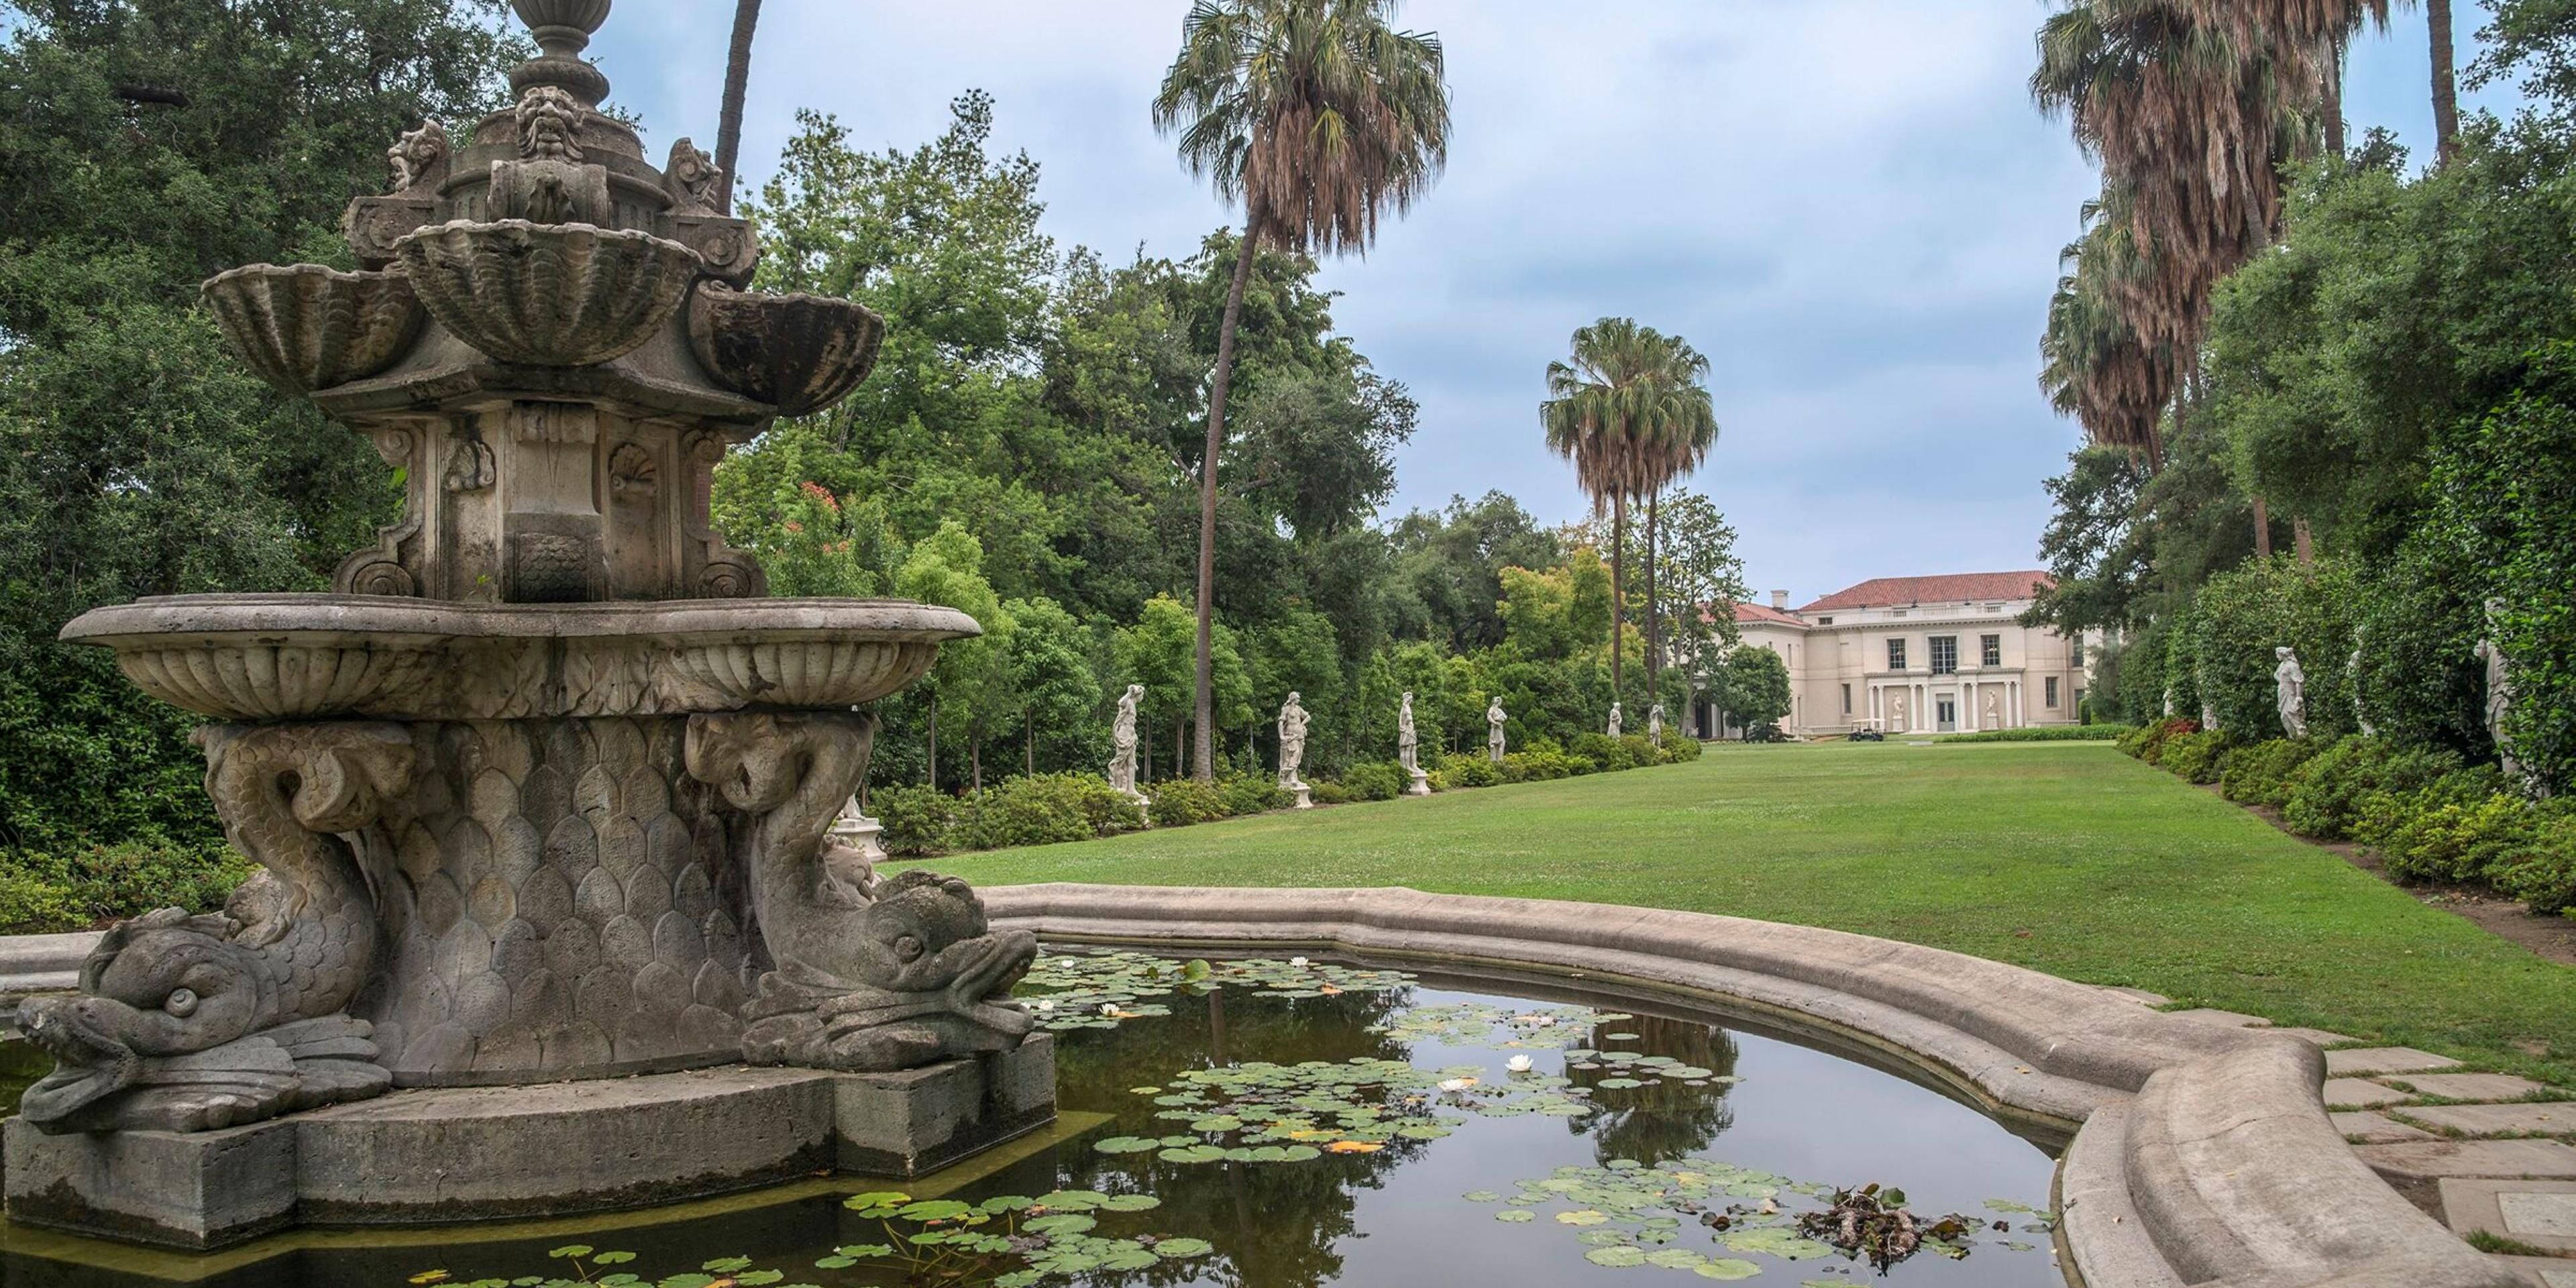 Located just 2 miles from the hotel, a popular tourist stop, the 207-acre complex houses a library, art collection, and stunning gardens.
